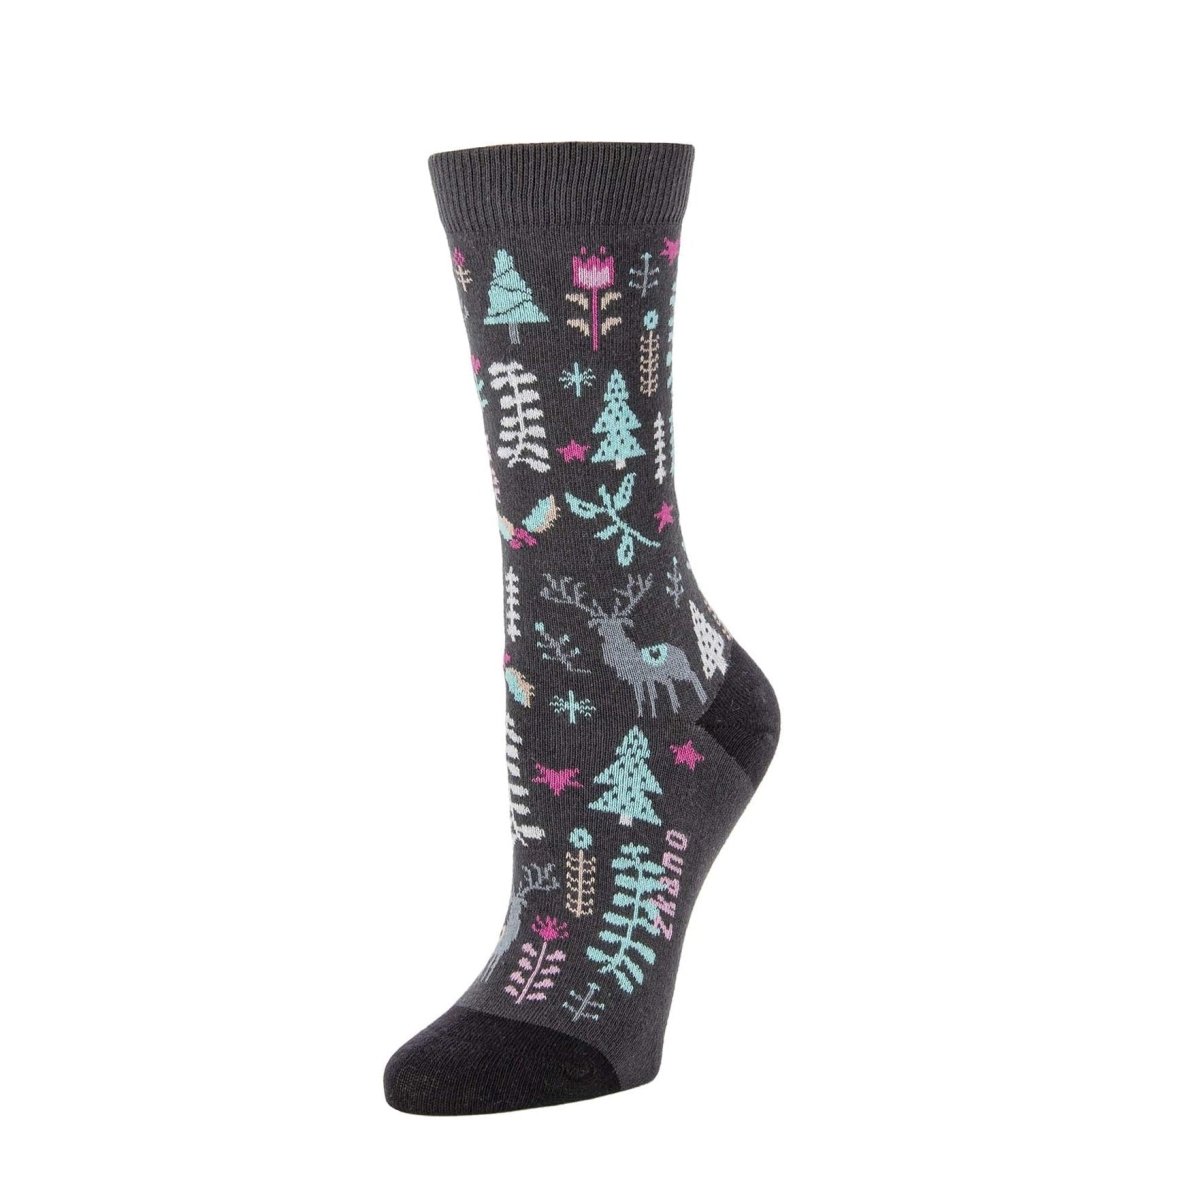 A charcoal colored sock with pink, teal and white woodland designs. The Winter Wonderland in Charcoal sock from Zkano is made in Alabama, USA.